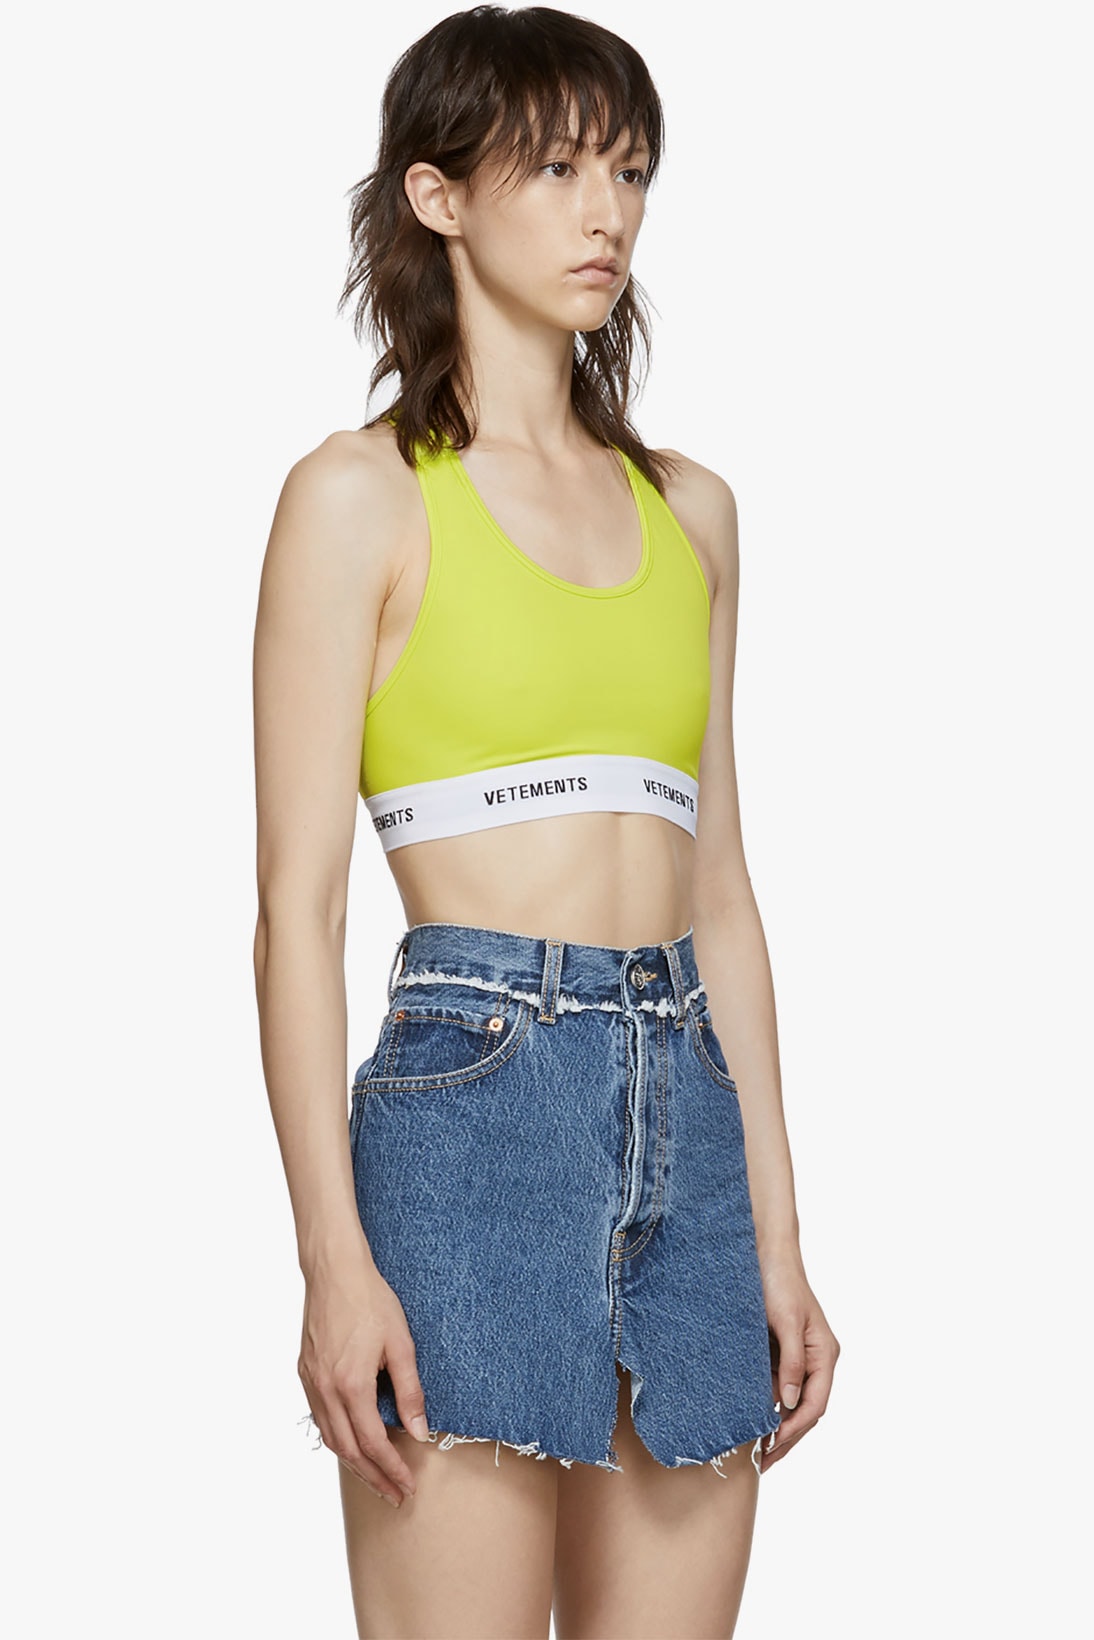 People Are Obsessed With This Calvin Klein Sports Bra—And It's On